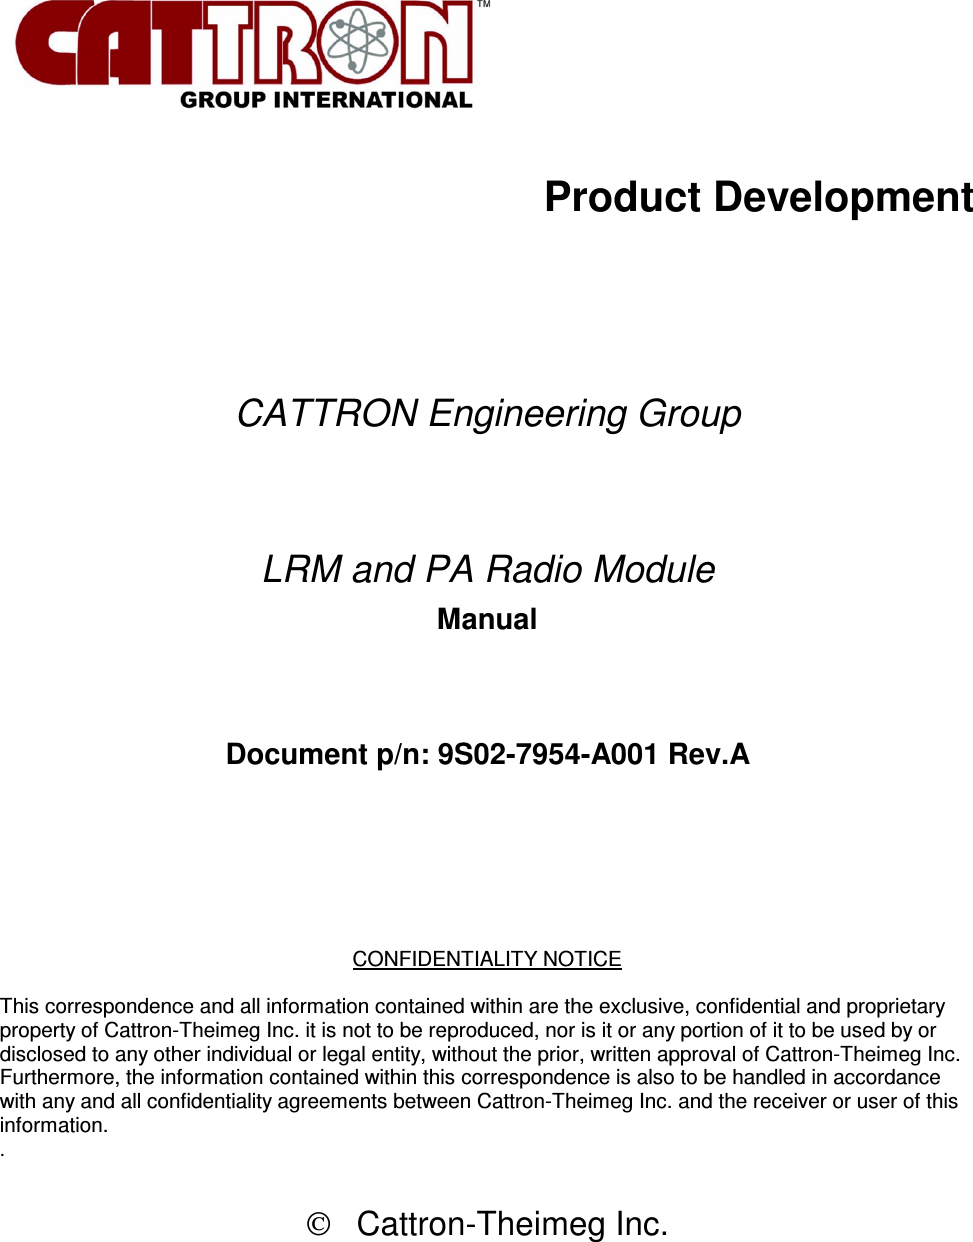           Product Development        CATTRON Engineering Group   LRM and PA Radio Module Manual   Document p/n: 9S02-7954-A001 Rev.A      CONFIDENTIALITY NOTICE  This correspondence and all information contained within are the exclusive, confidential and proprietary property of Cattron-Theimeg Inc. it is not to be reproduced, nor is it or any portion of it to be used by or disclosed to any other individual or legal entity, without the prior, written approval of Cattron-Theimeg Inc. Furthermore, the information contained within this correspondence is also to be handled in accordance with any and all confidentiality agreements between Cattron-Theimeg Inc. and the receiver or user of this information.  .     Cattron-Theimeg Inc.  